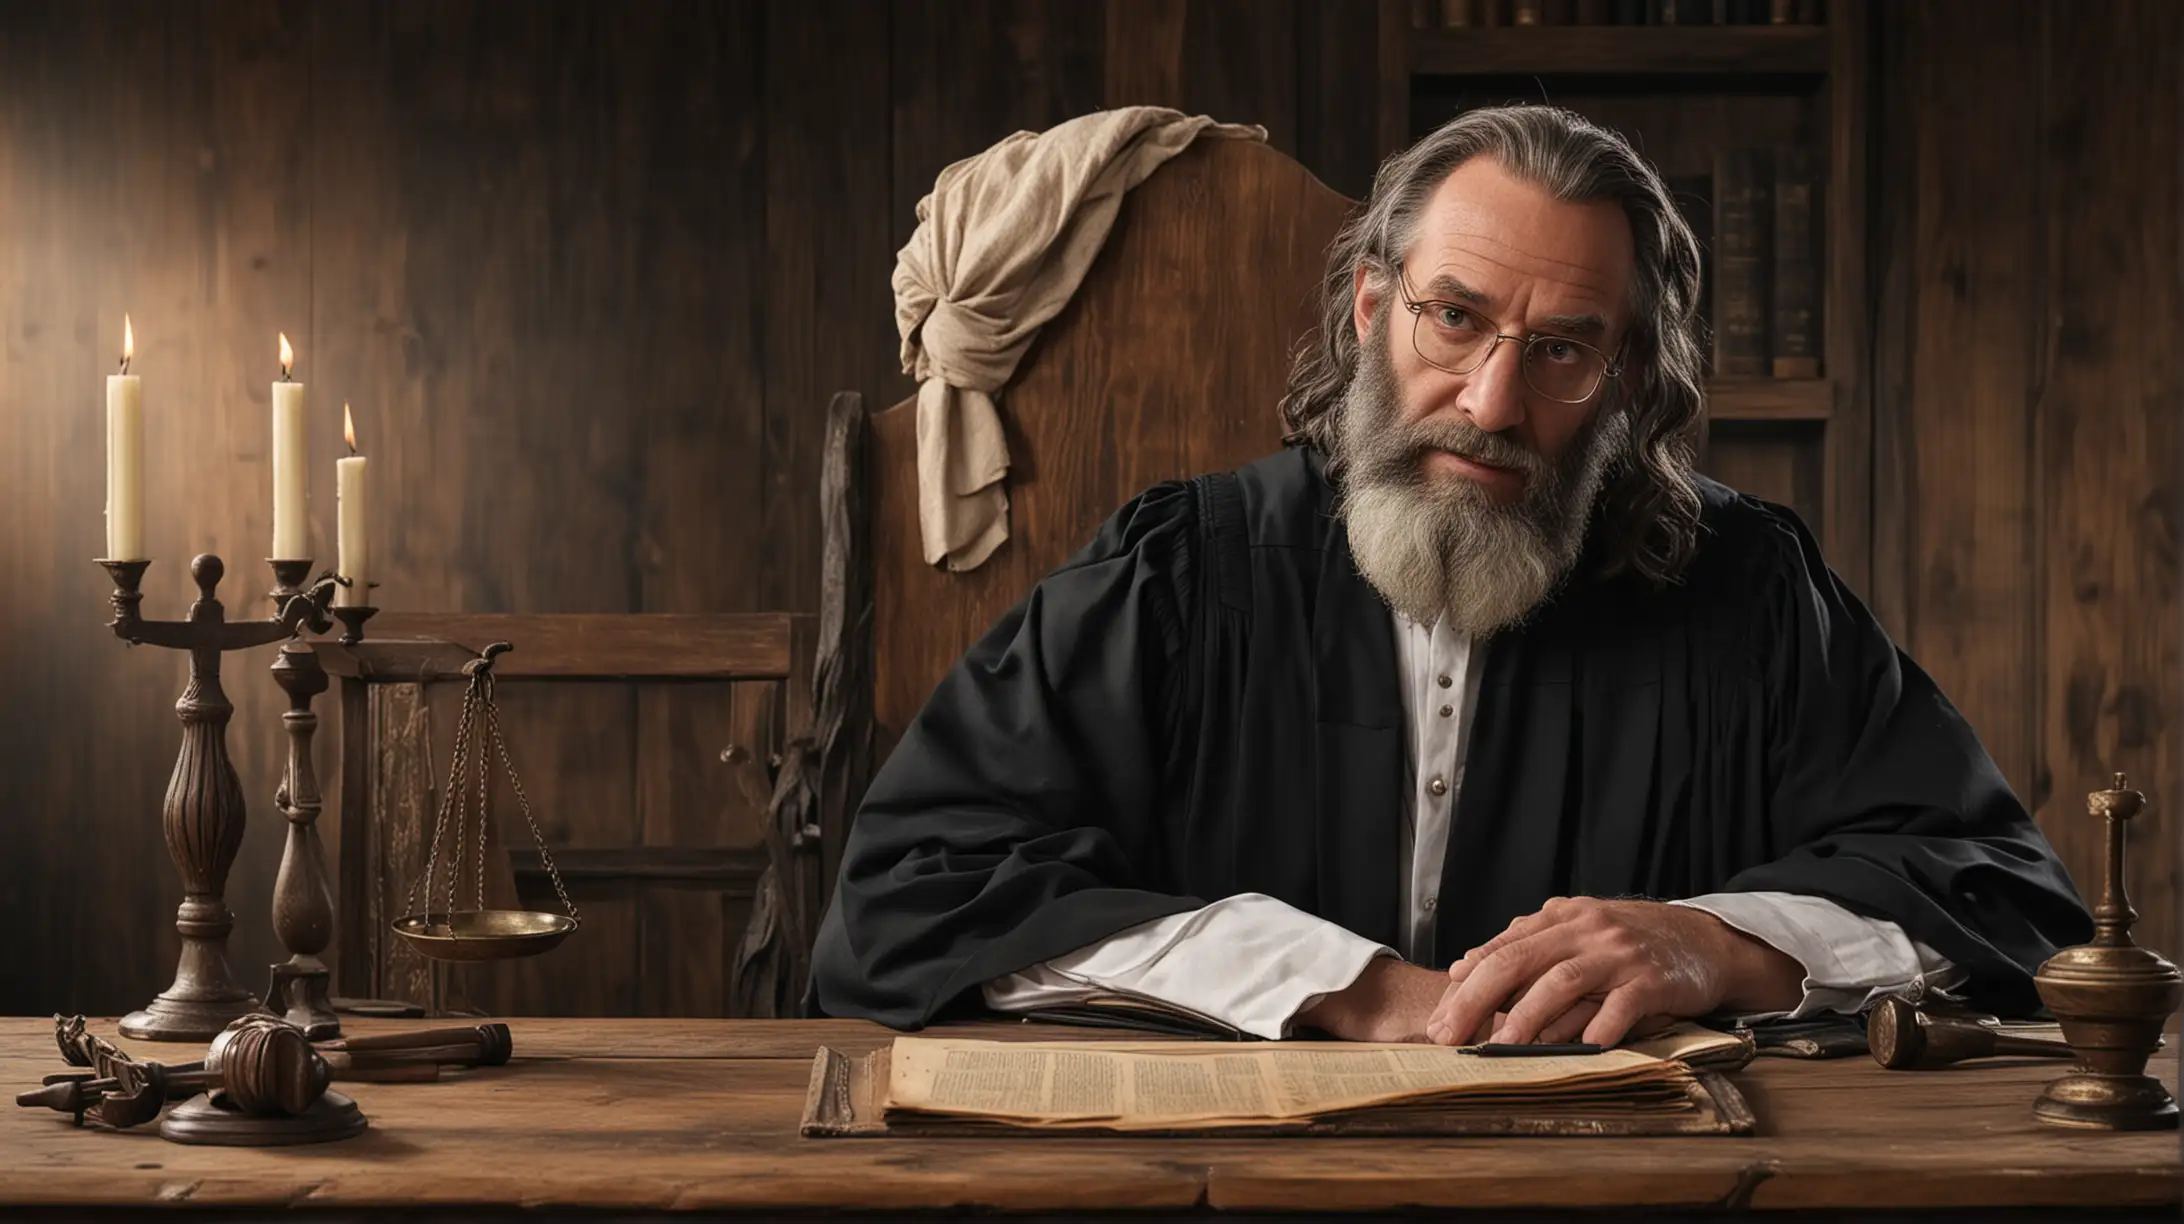 Serious Male Judge at Wooden Desk Biblical Moses Era Depiction